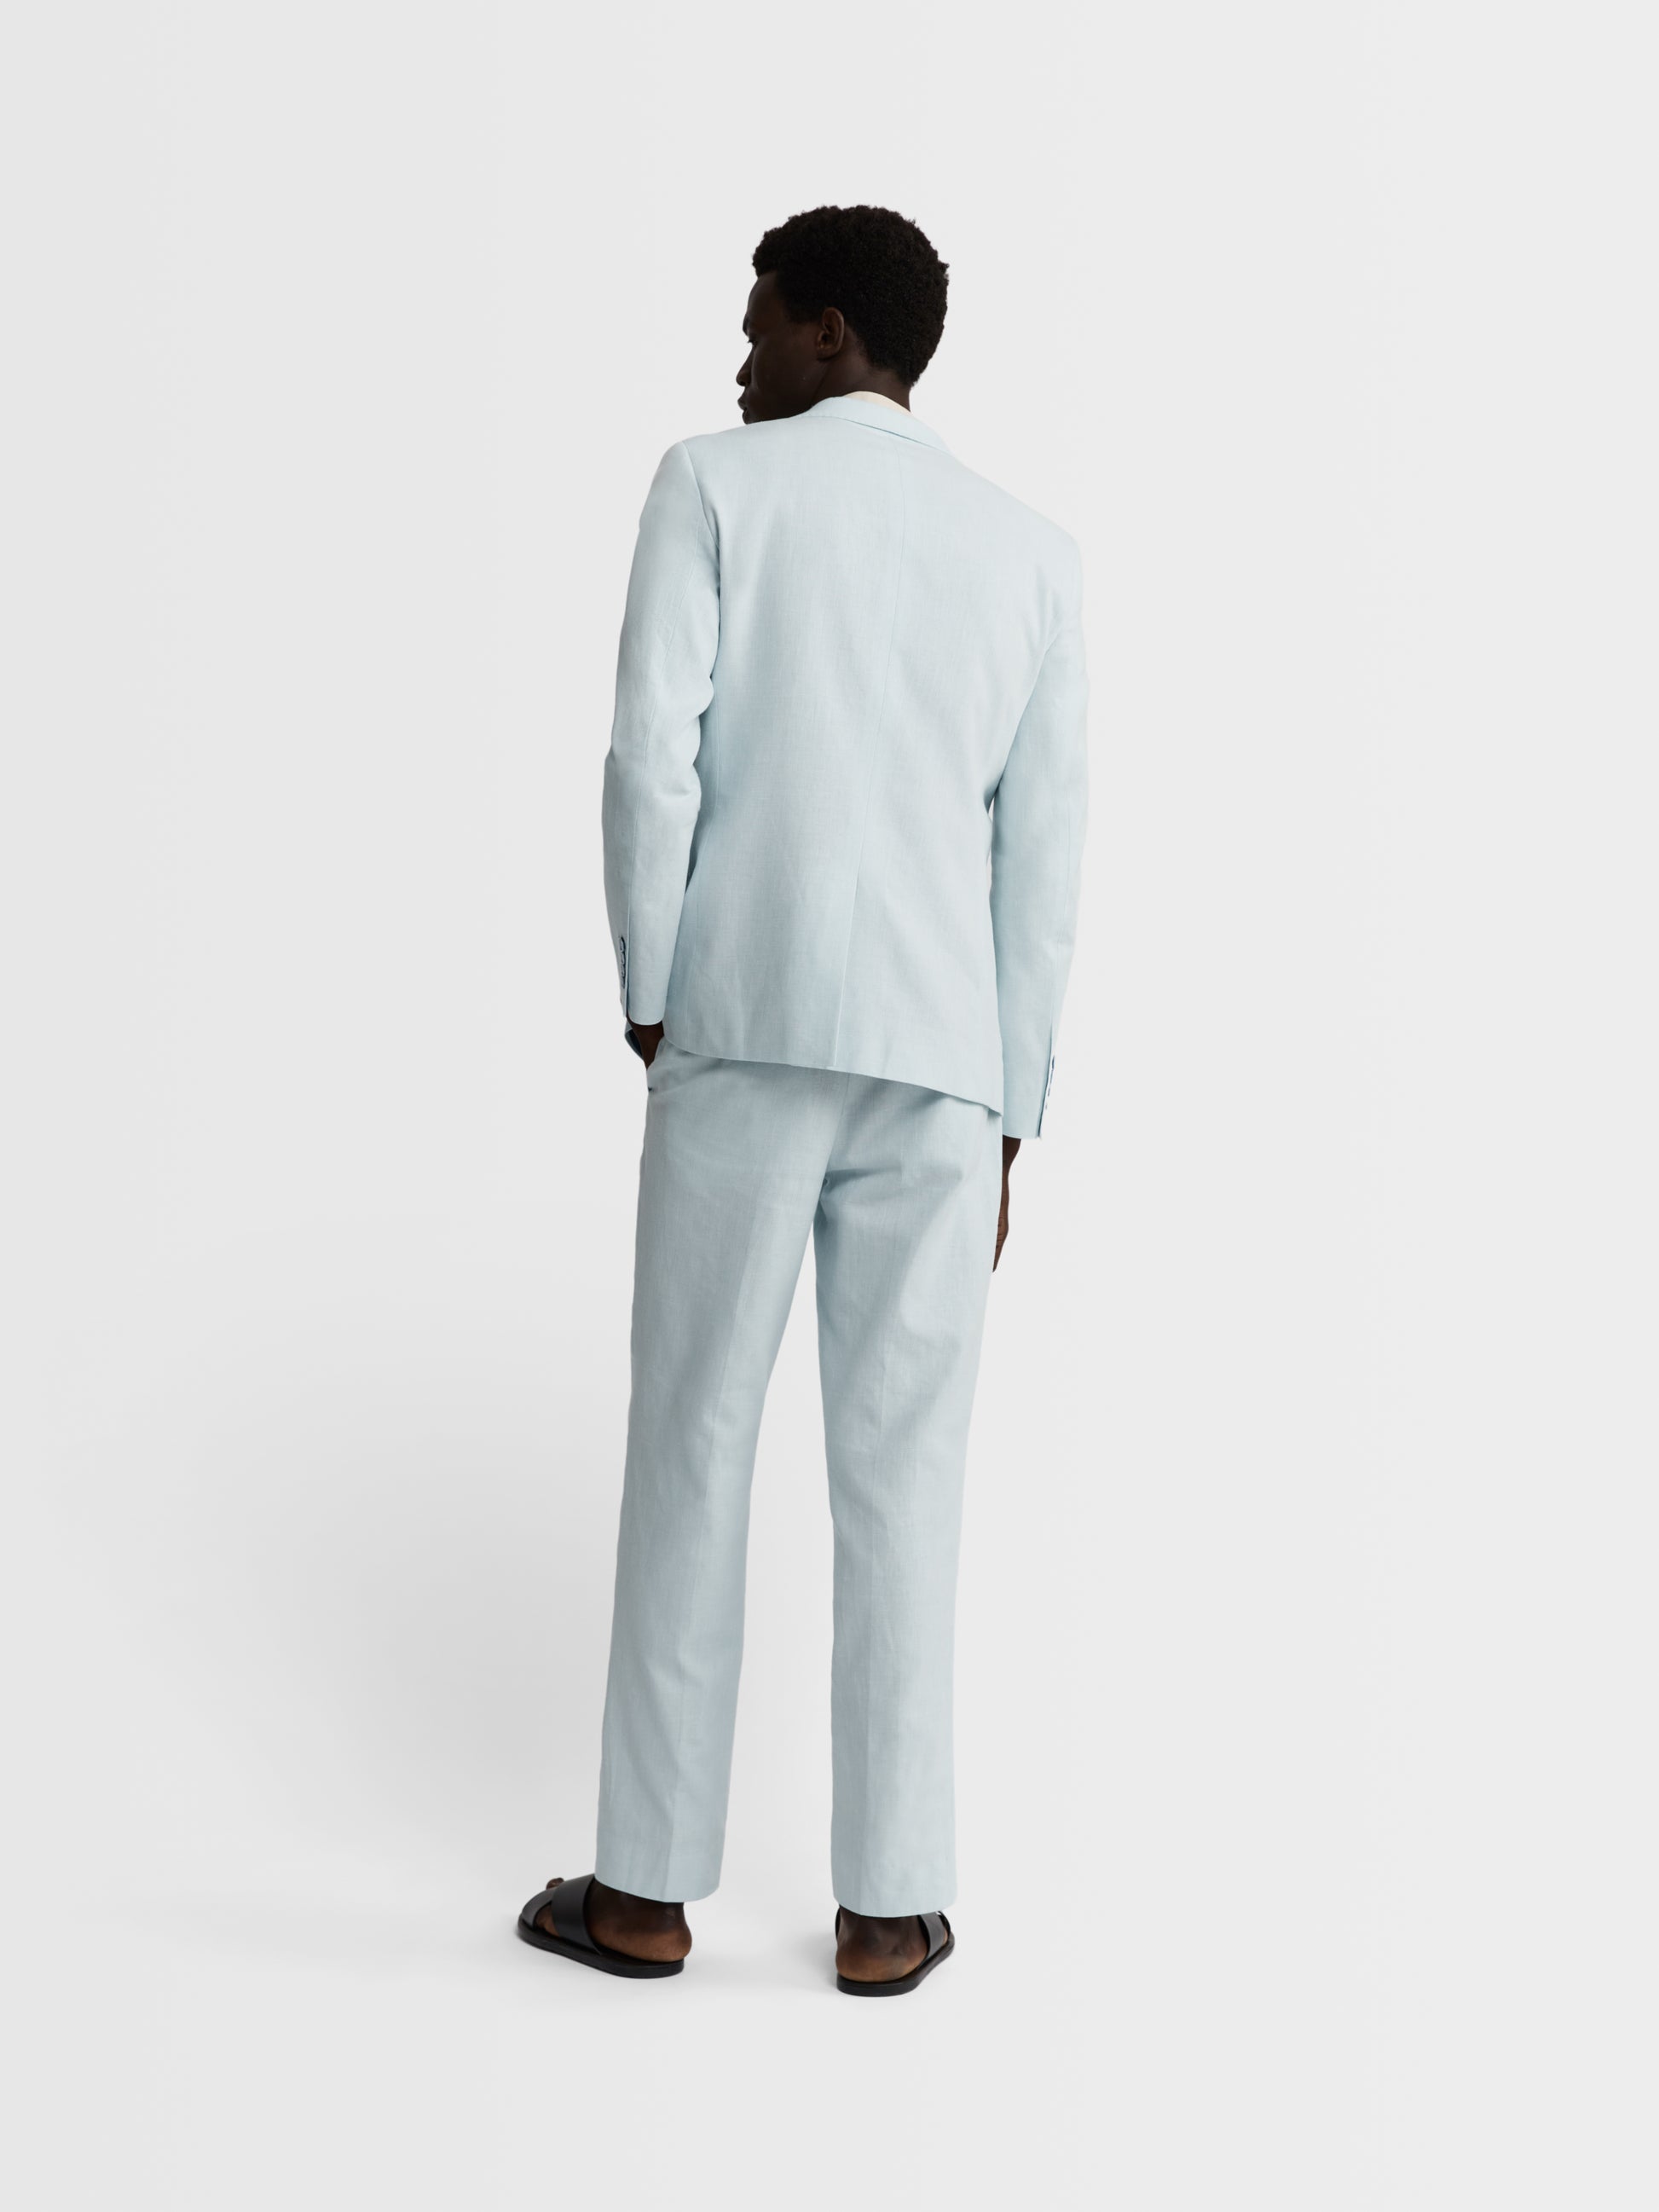 Image 6 of Slim Fit Single Breasted Linen Suit Jacket in Light Blue